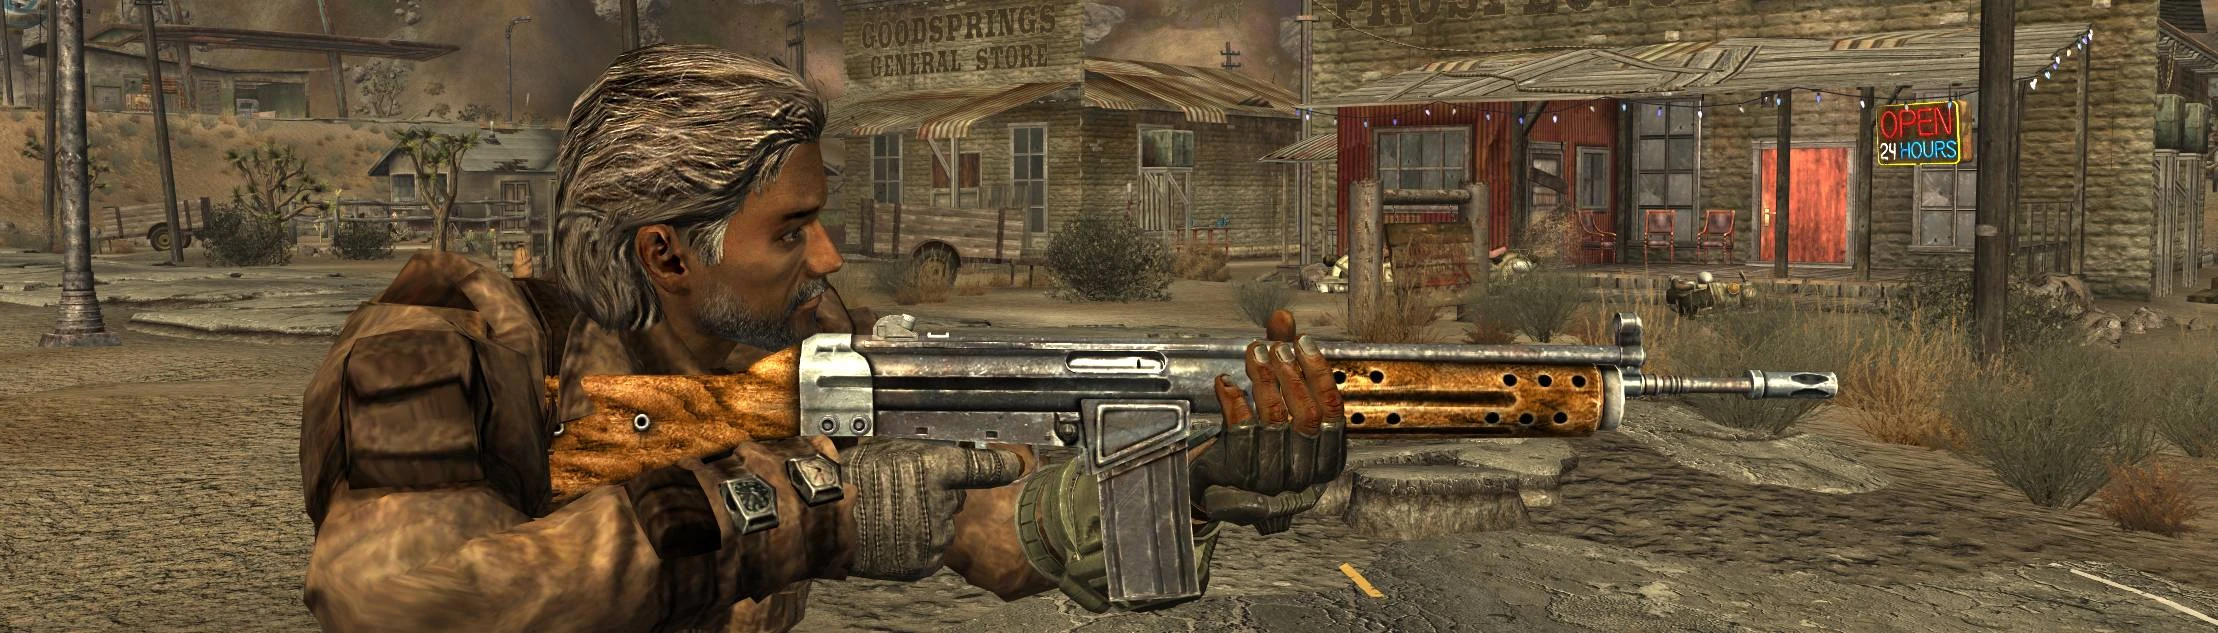 Image 2 - Regrowth New Vegas Edition mod for Fallout: New Vegas - Mod DB